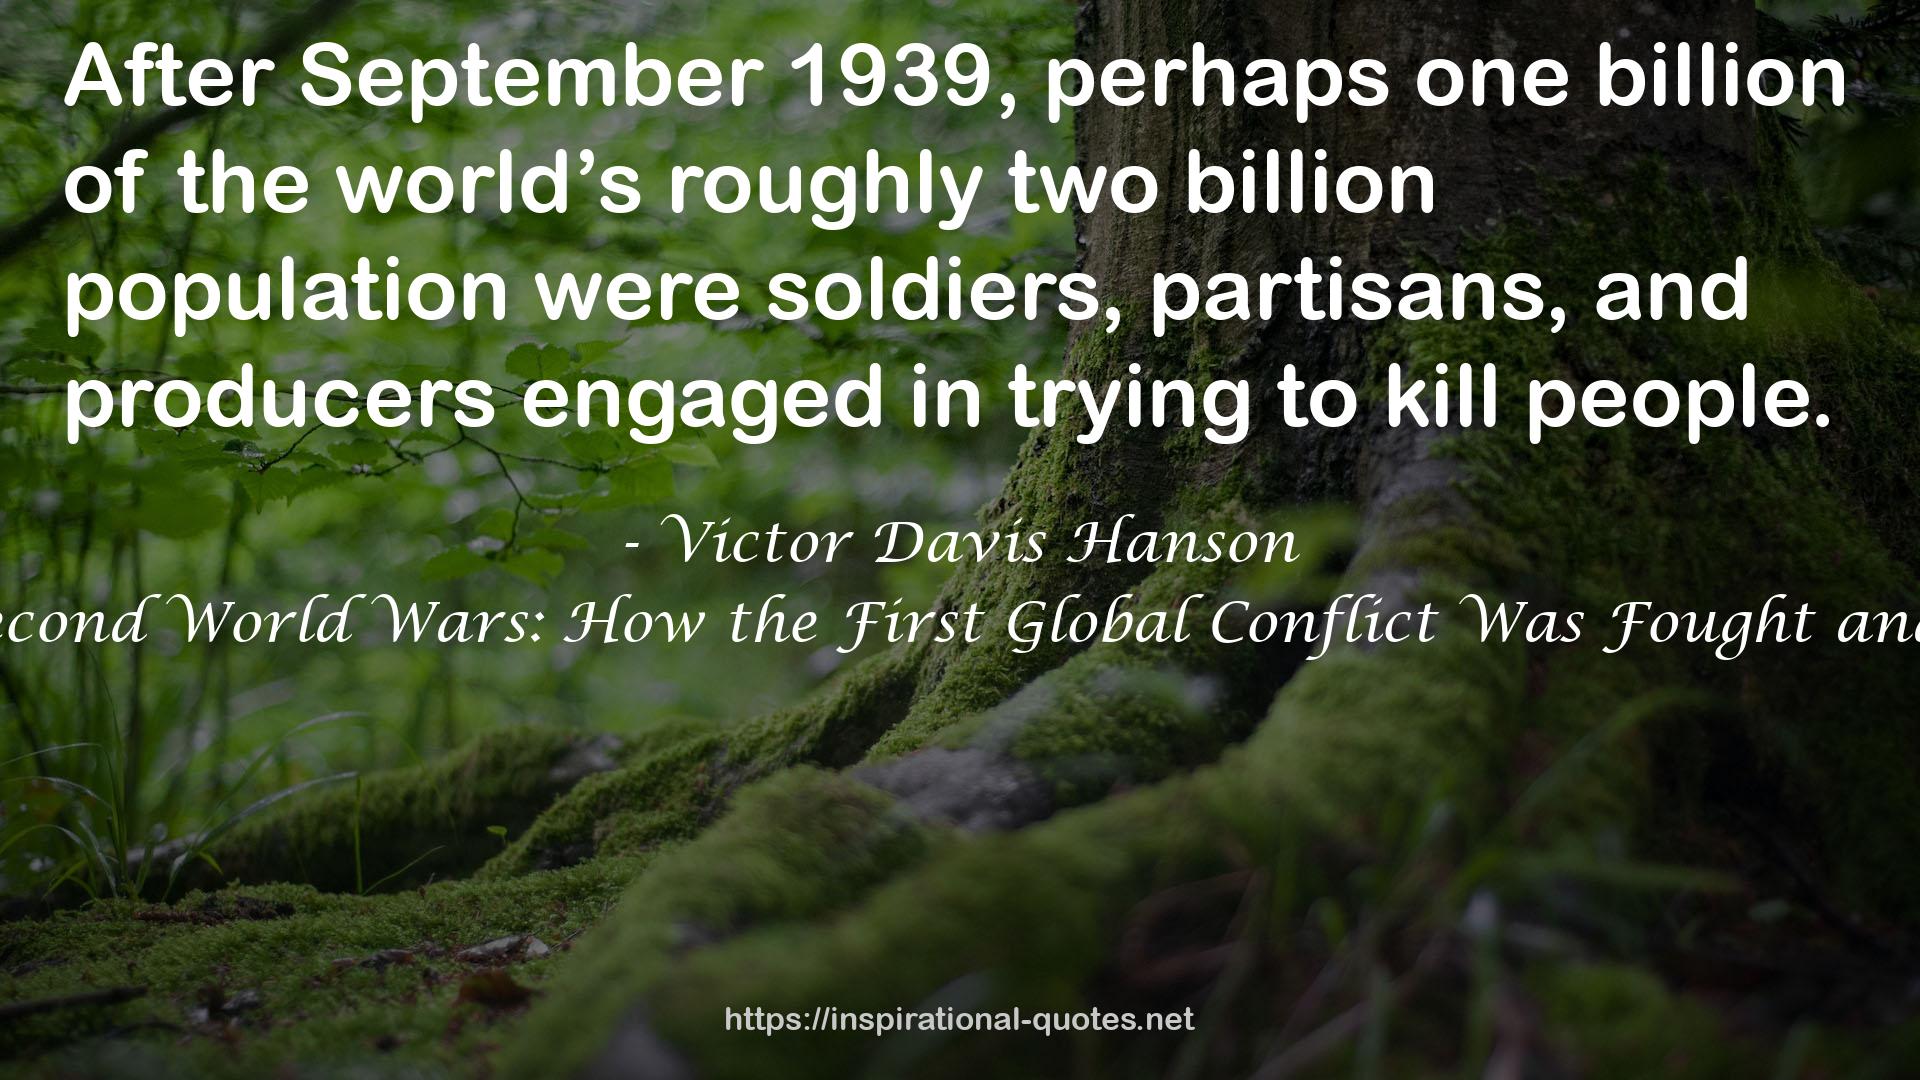 The Second World Wars: How the First Global Conflict Was Fought and Won QUOTES